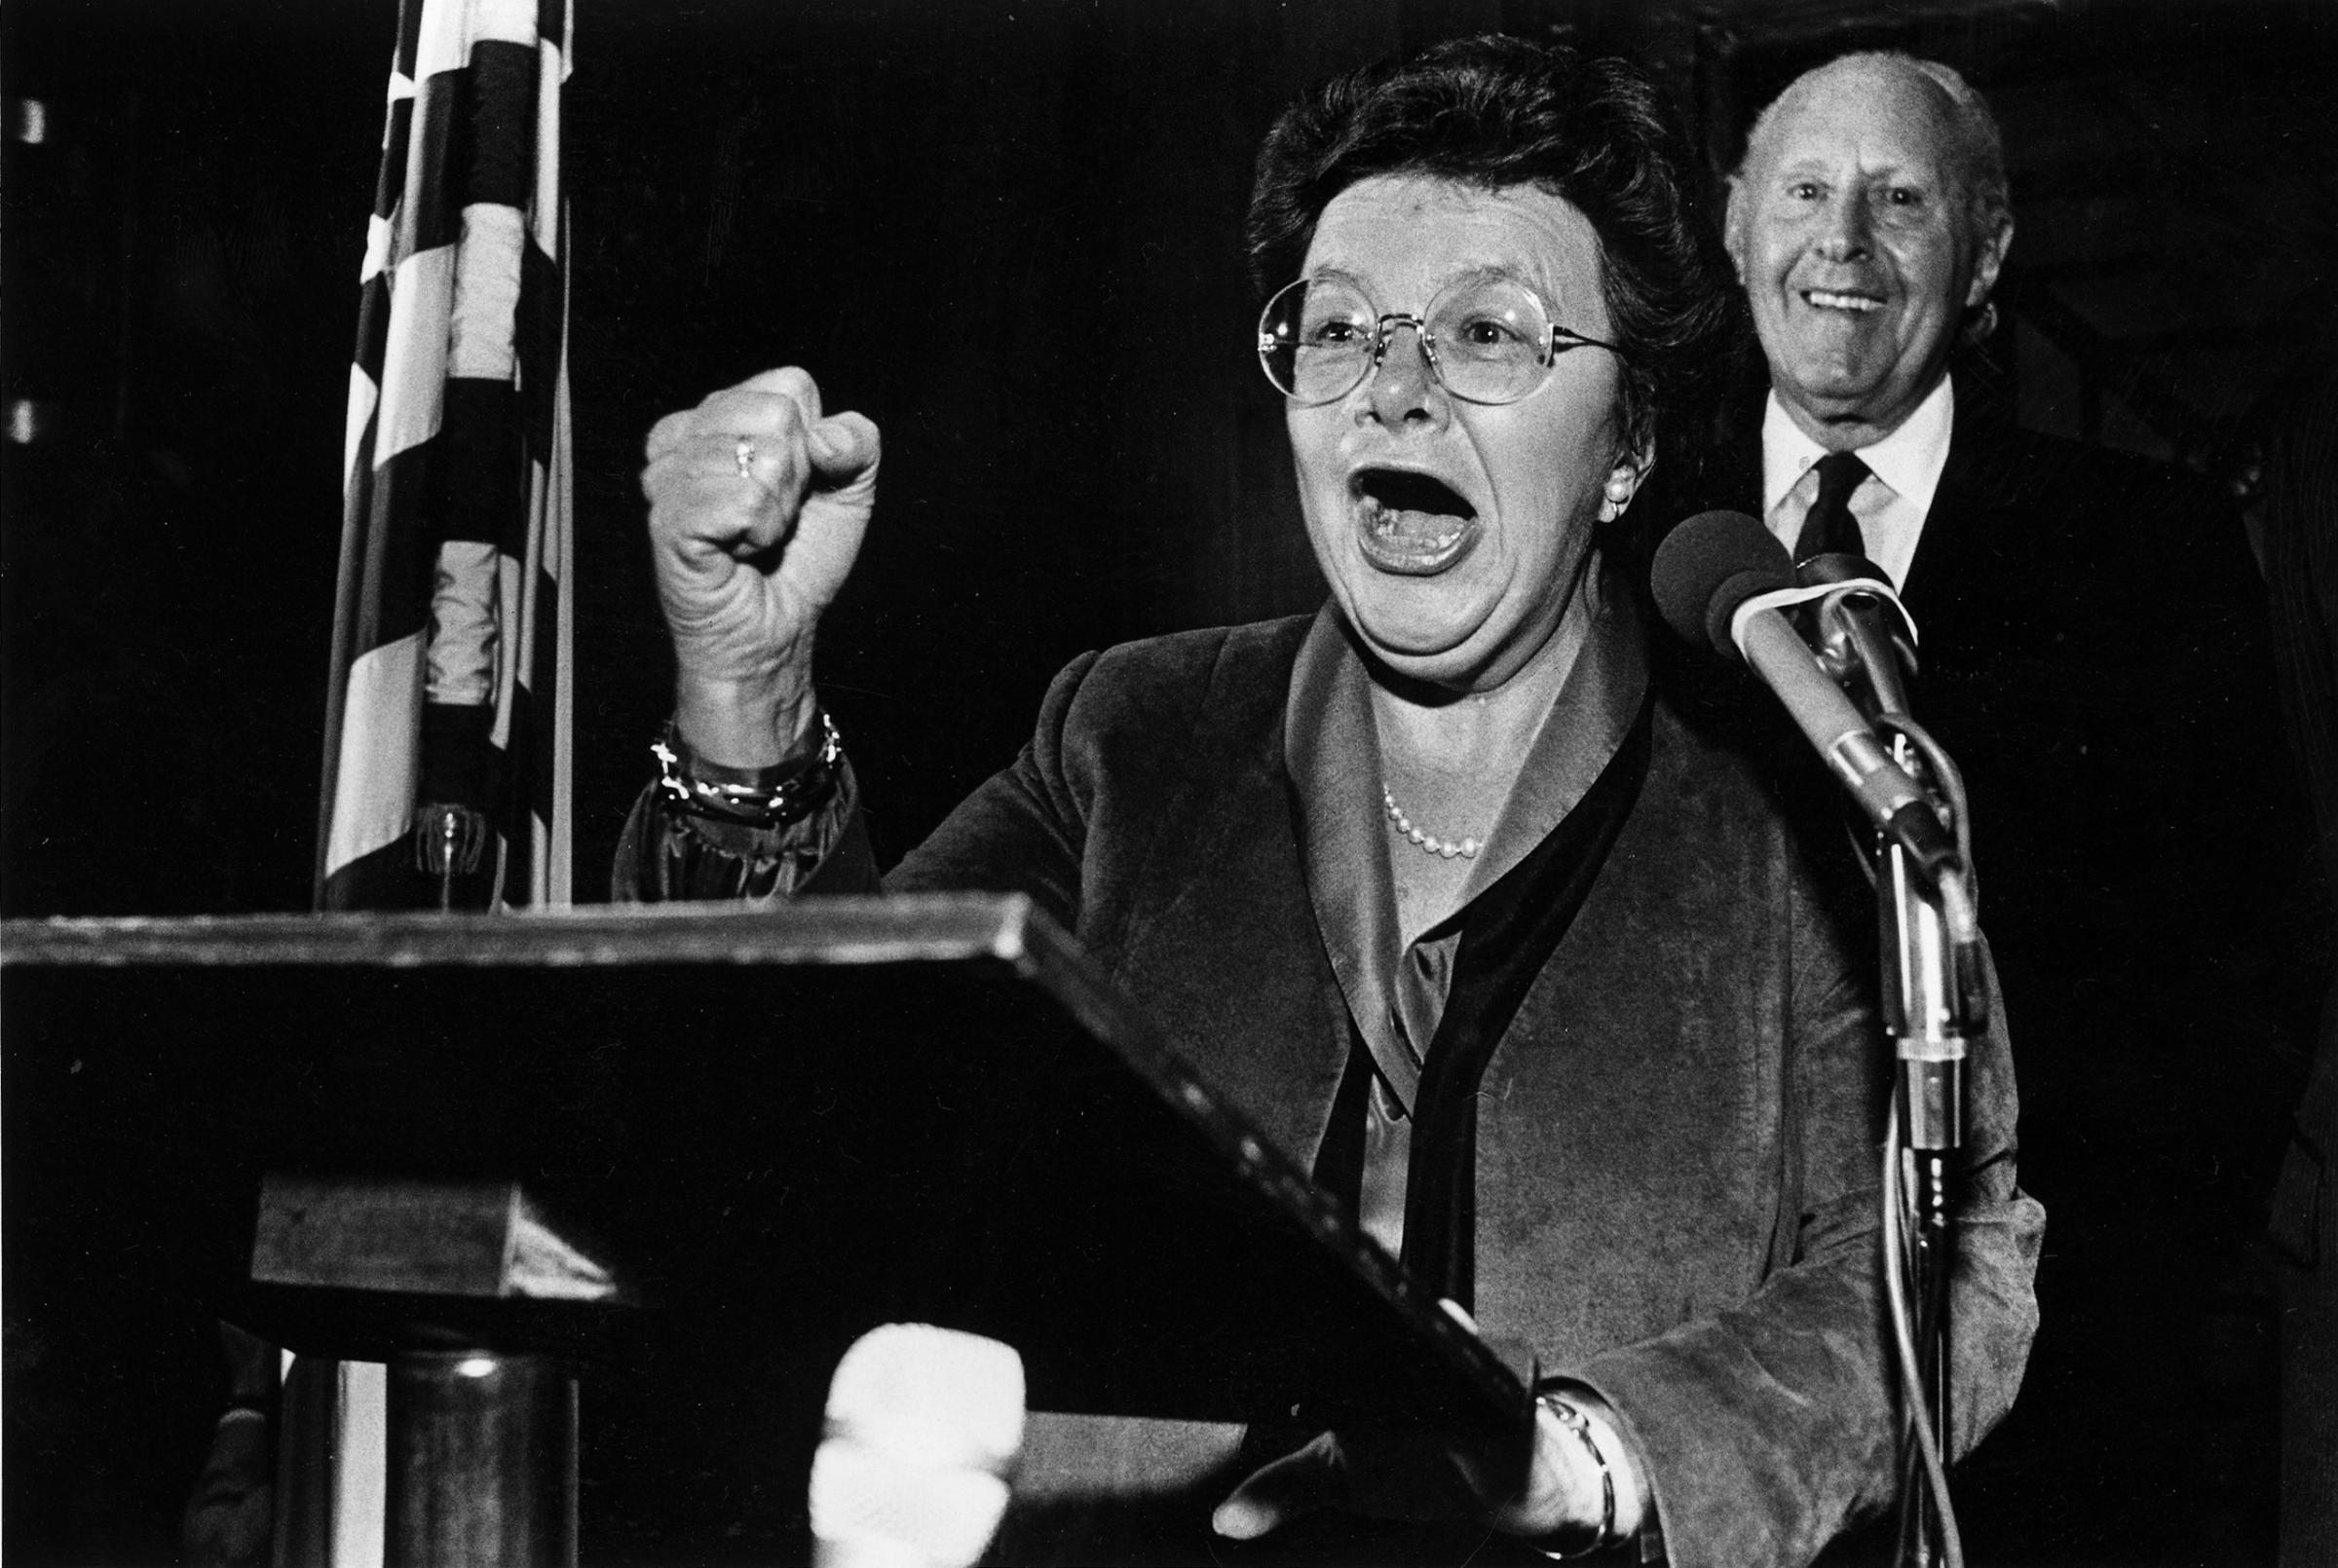 Barbara Mikulski at her reception following her swearing-in at the U.S. Capitol in Washington, DC on Jan. 6, 1987.